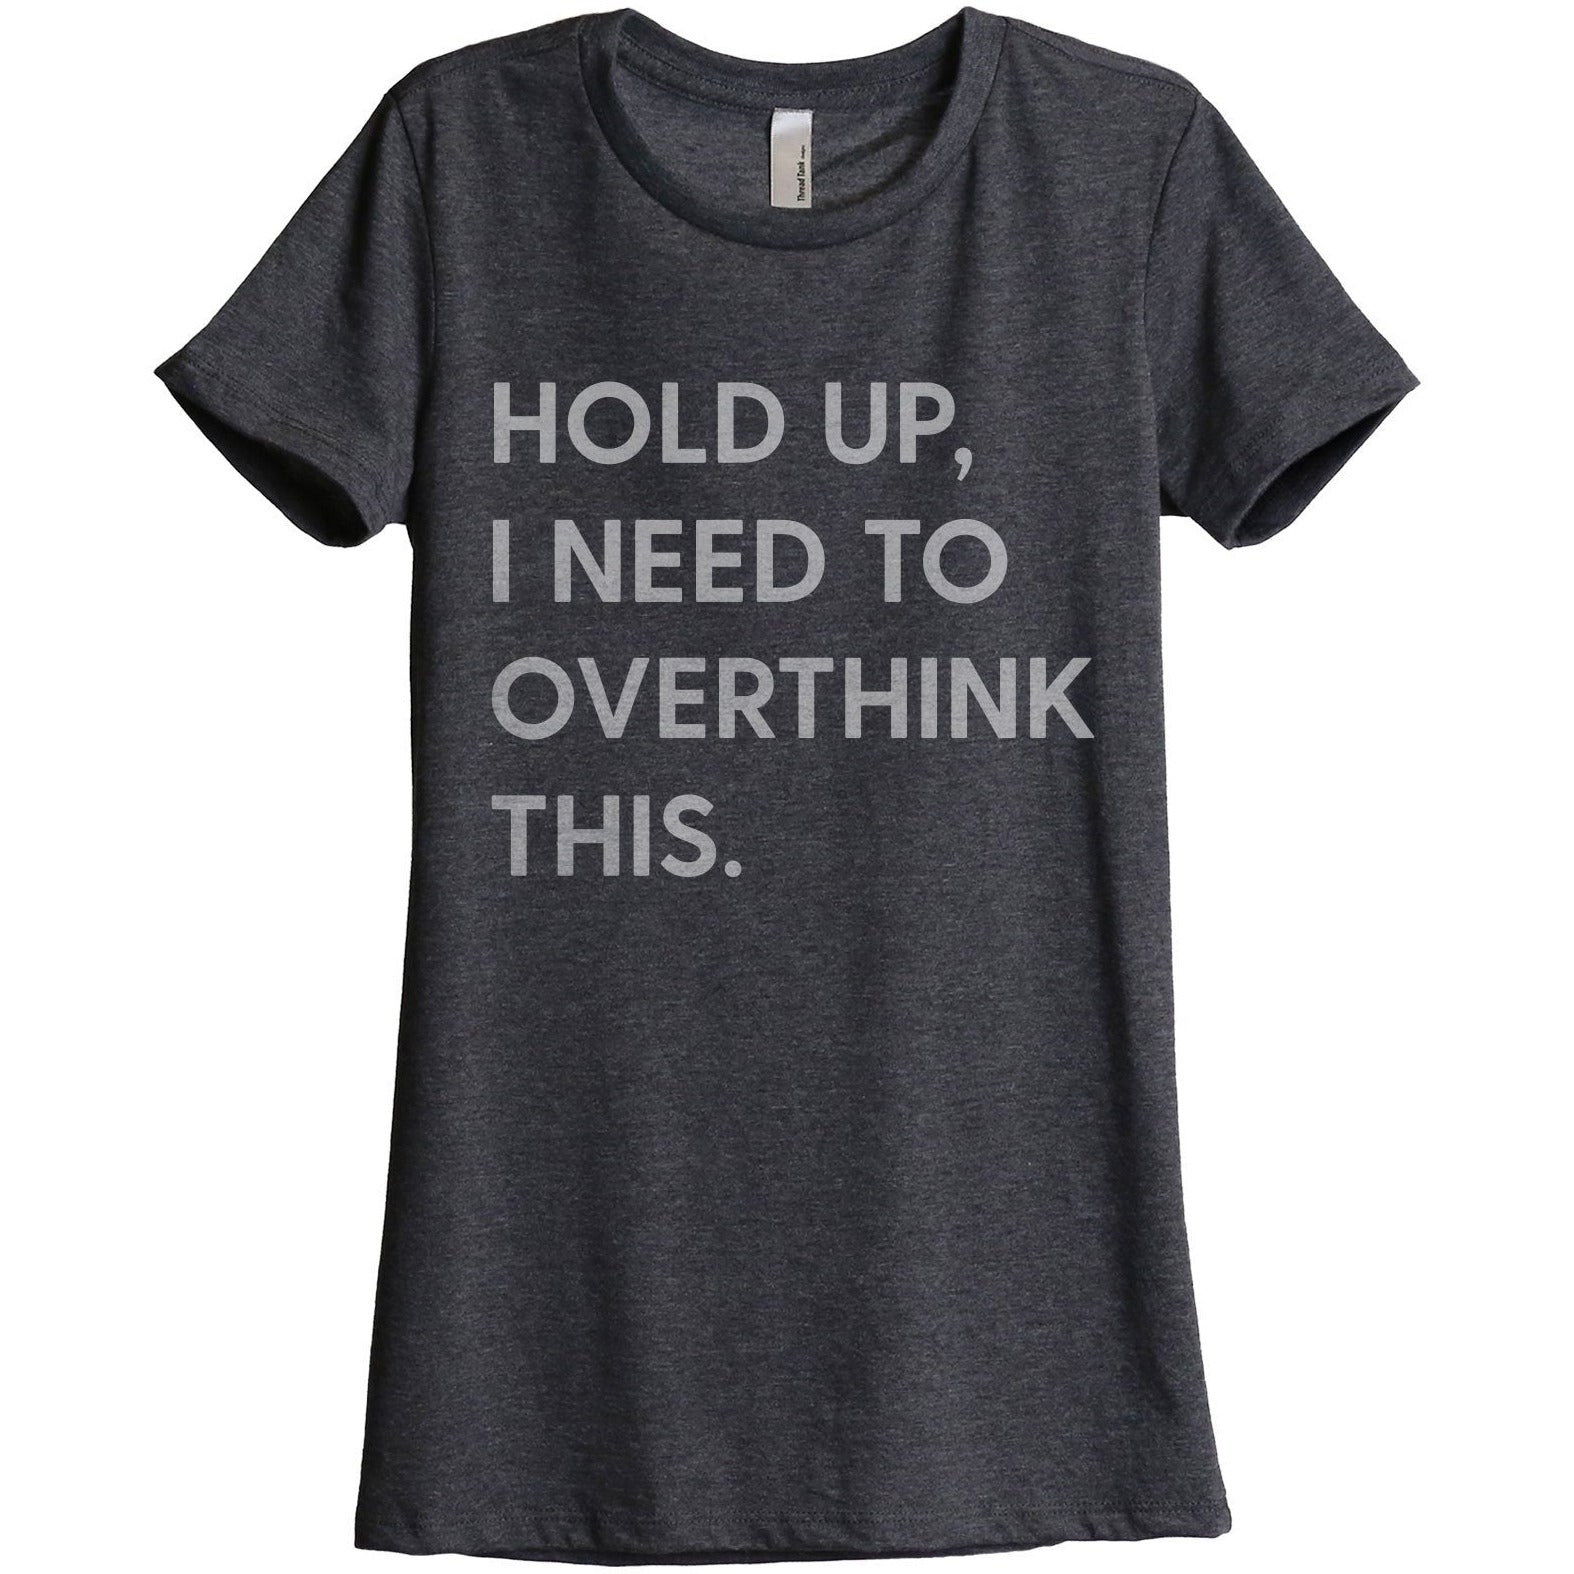 Hold Up, I Need To Rethink This Women's Relaxed Crewneck T-Shirt Top Tee Charcoal Grey
